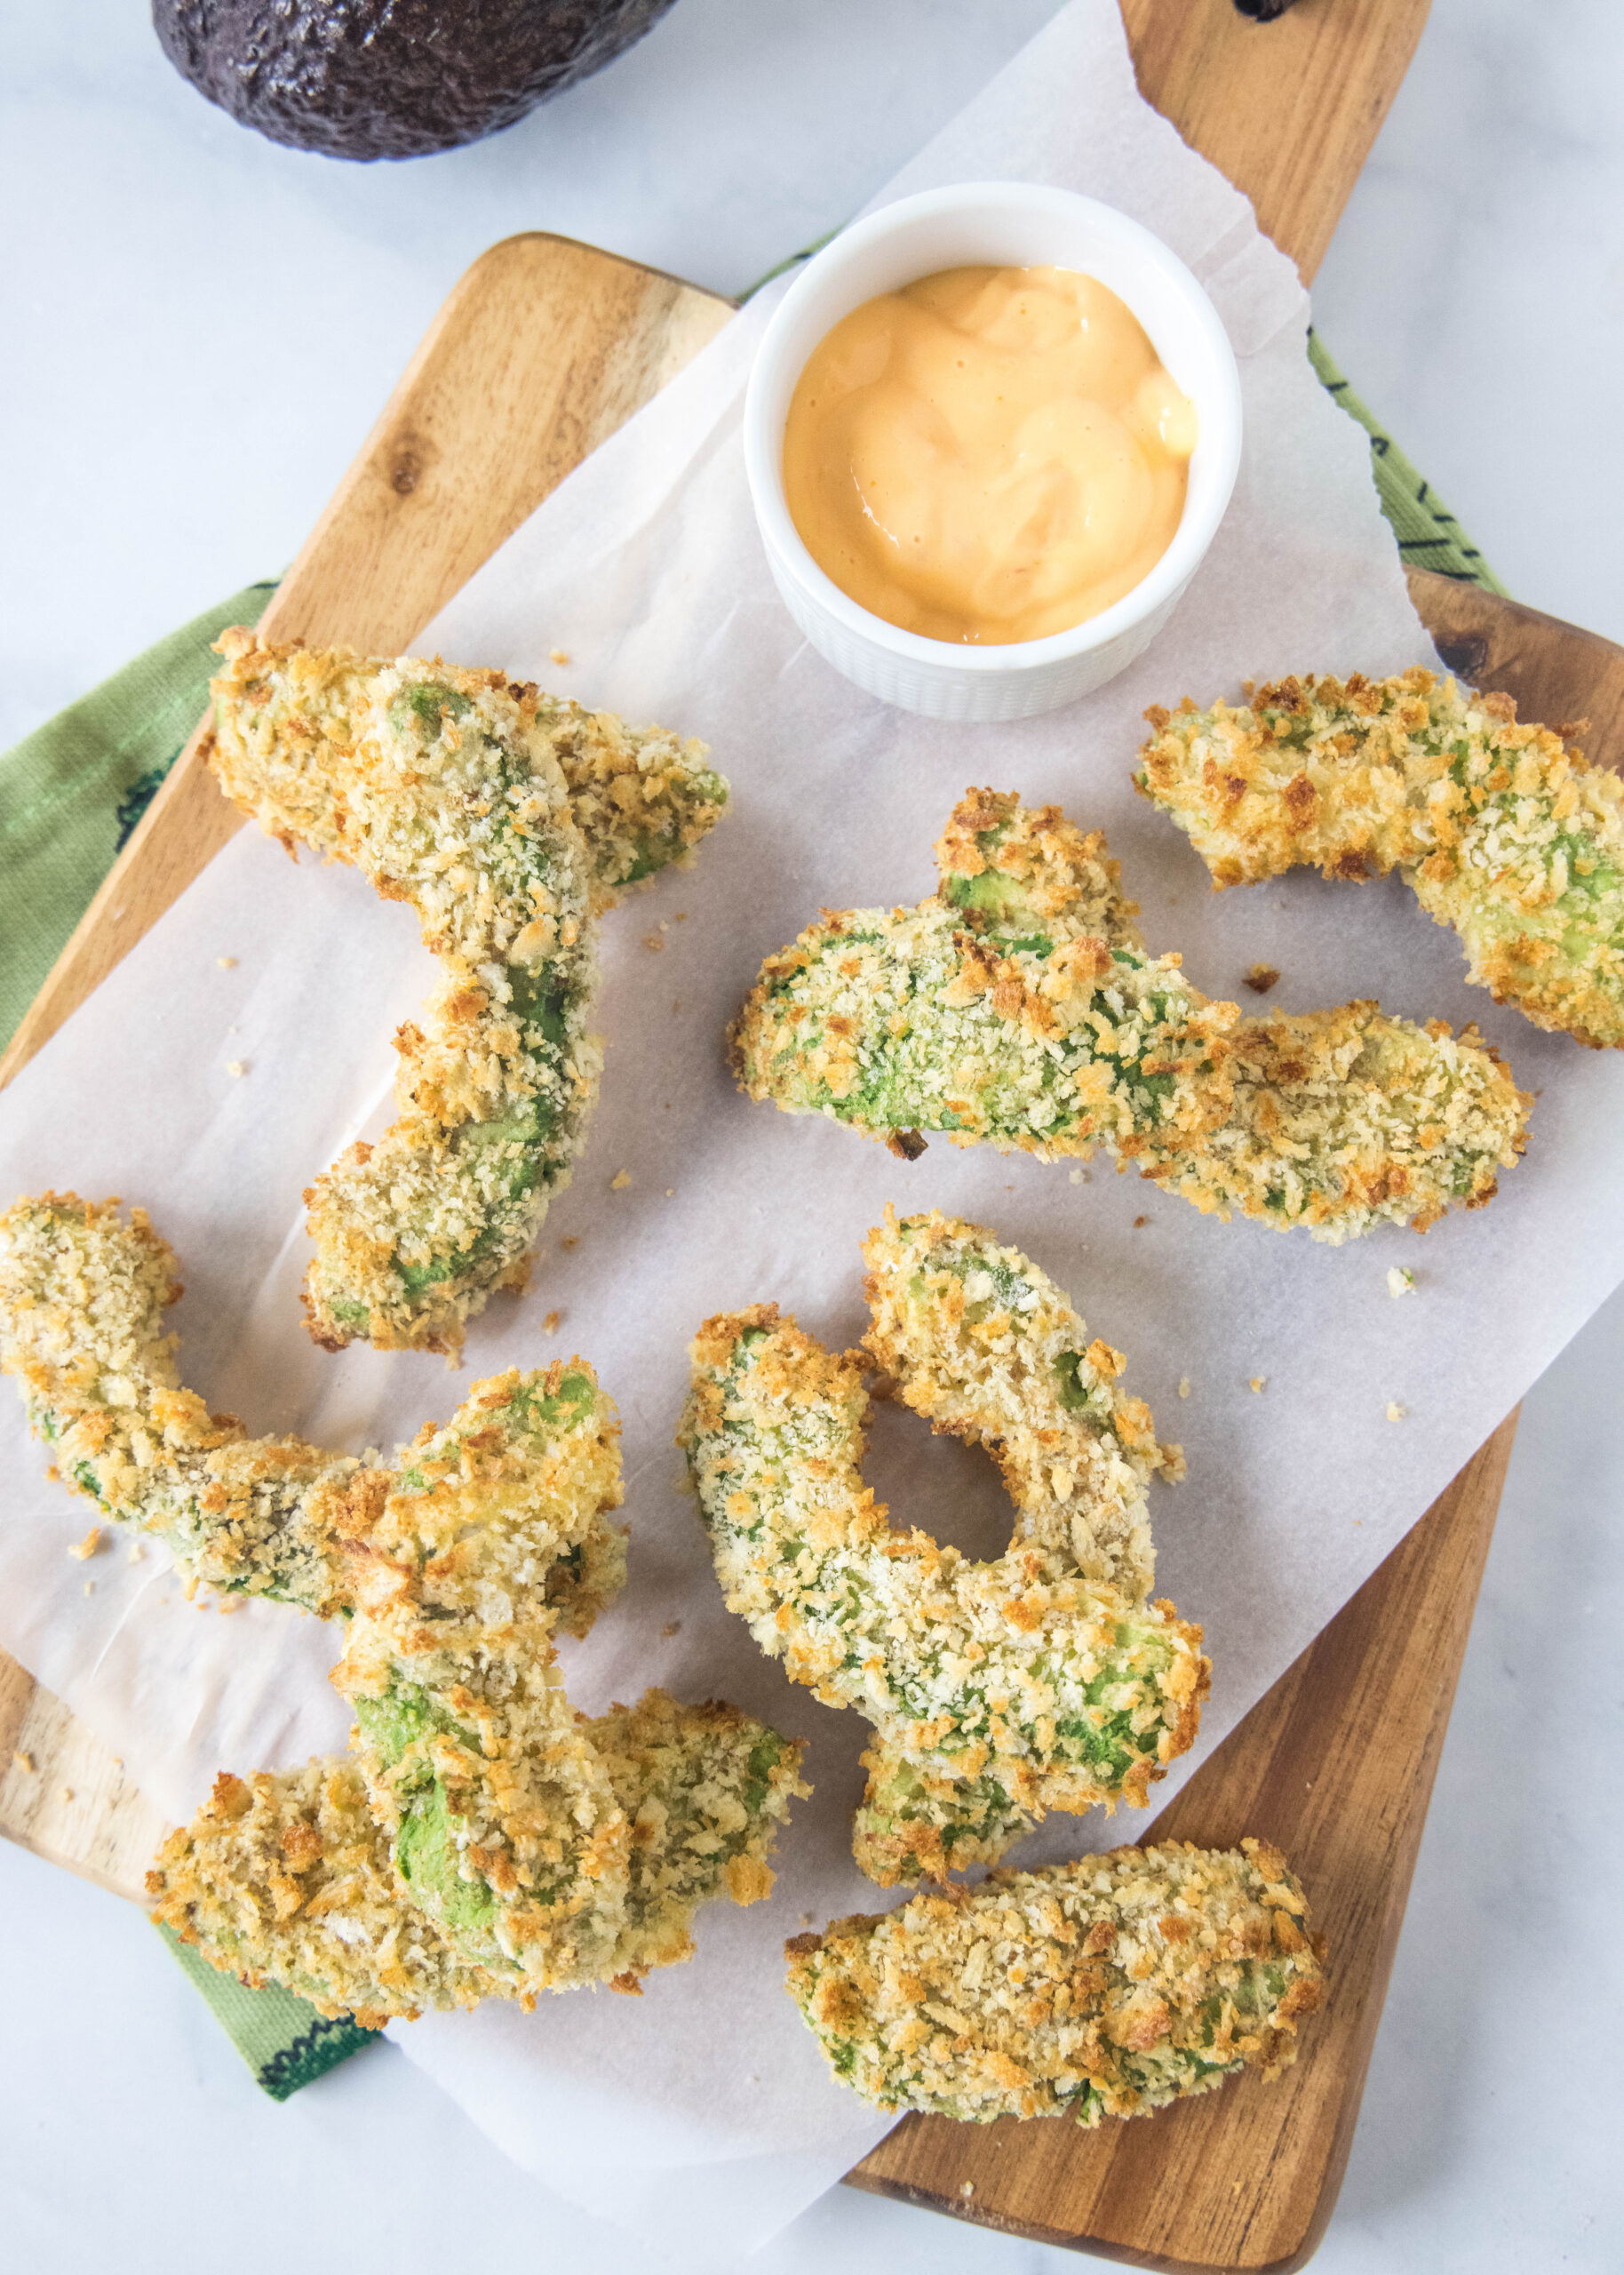 Overhead view of scattered avocado fries on a wooden cutting board lined with parchment paper, next to a small bowl of dipping sauce.